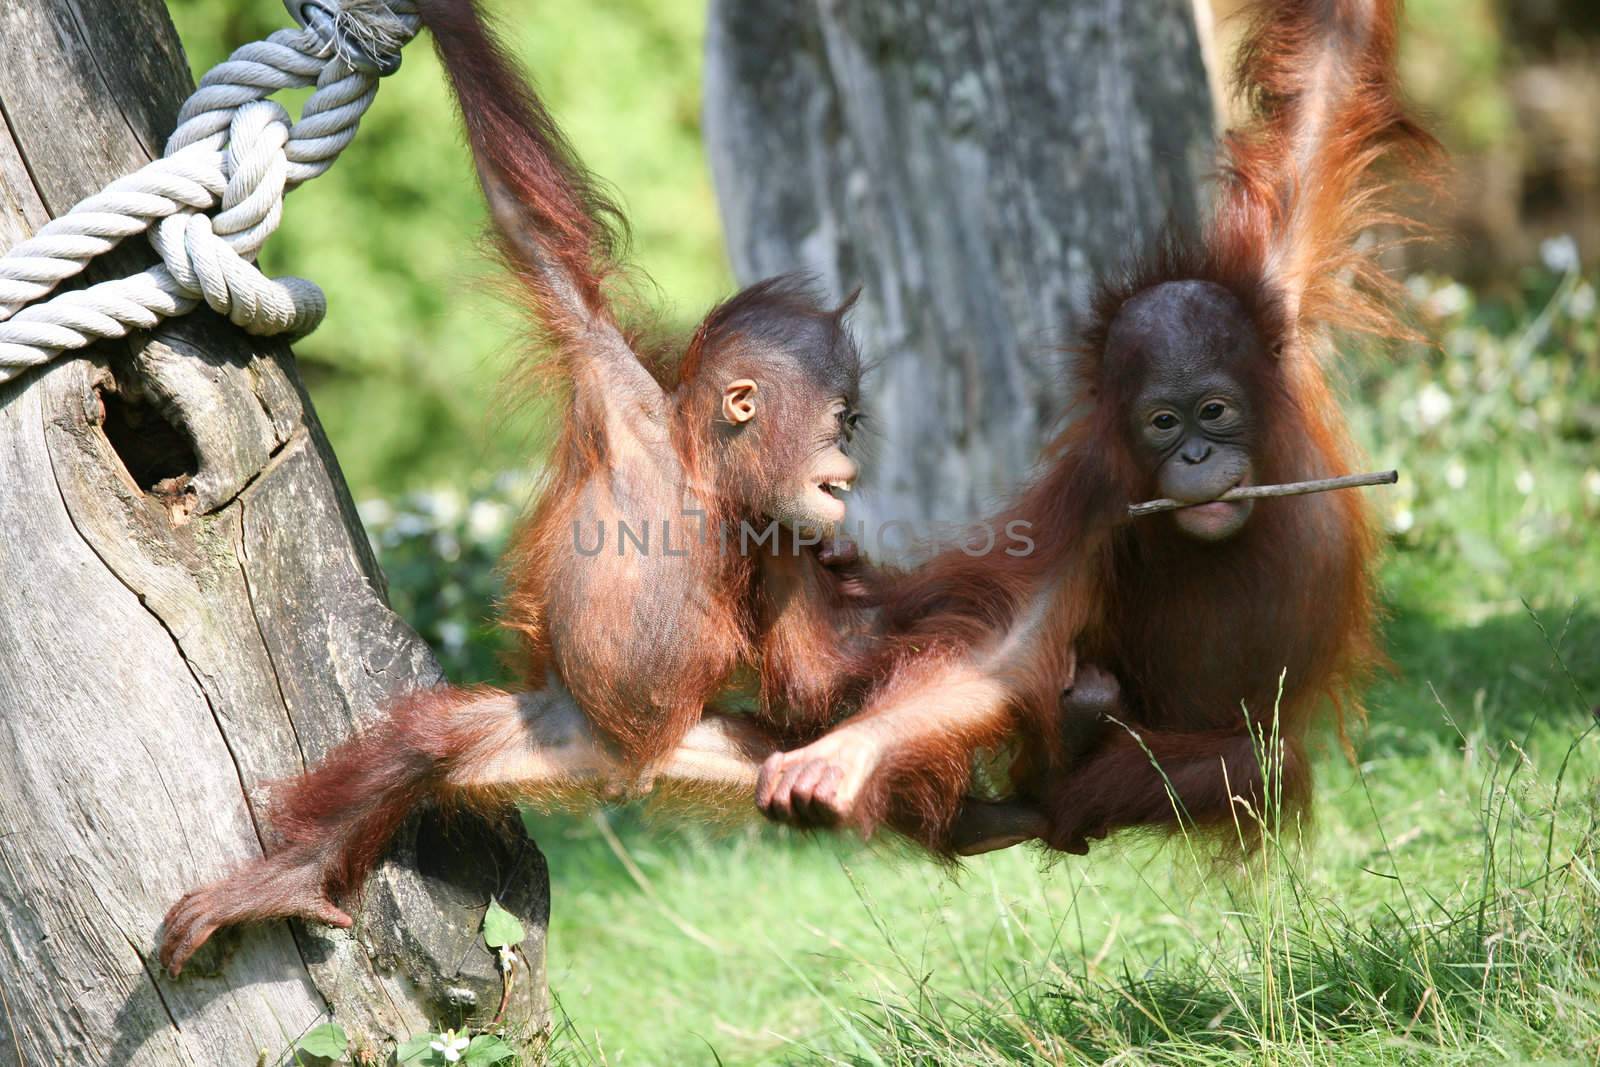 Two baby orang utans playing together in the sunshine